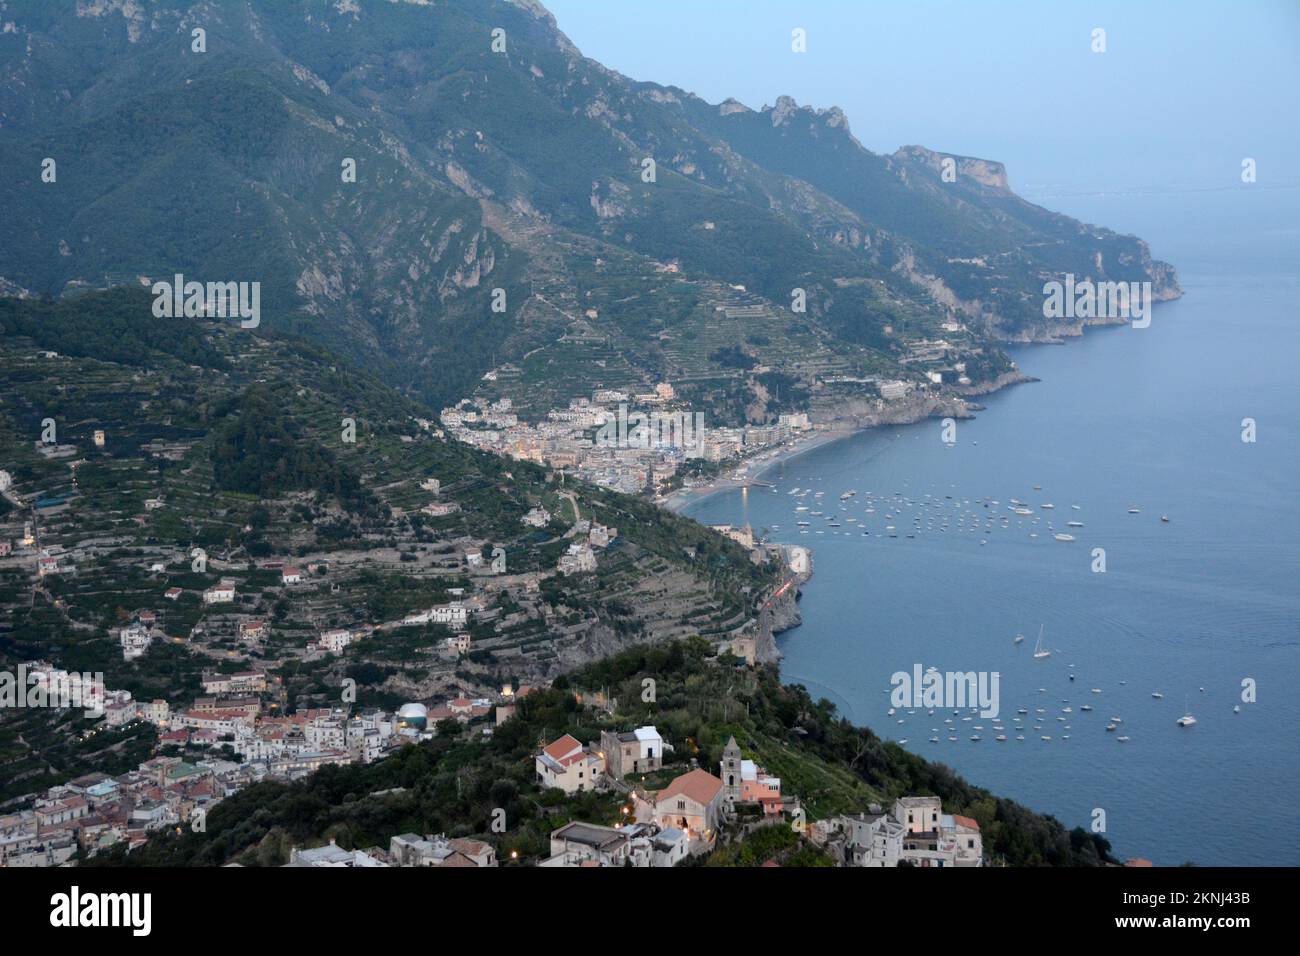 A view at dusk of the scenic Amalfi Coast from Ravello looking towards the coastal beach towns of Minori and Maori, in Campania, southern Italy. Stock Photo